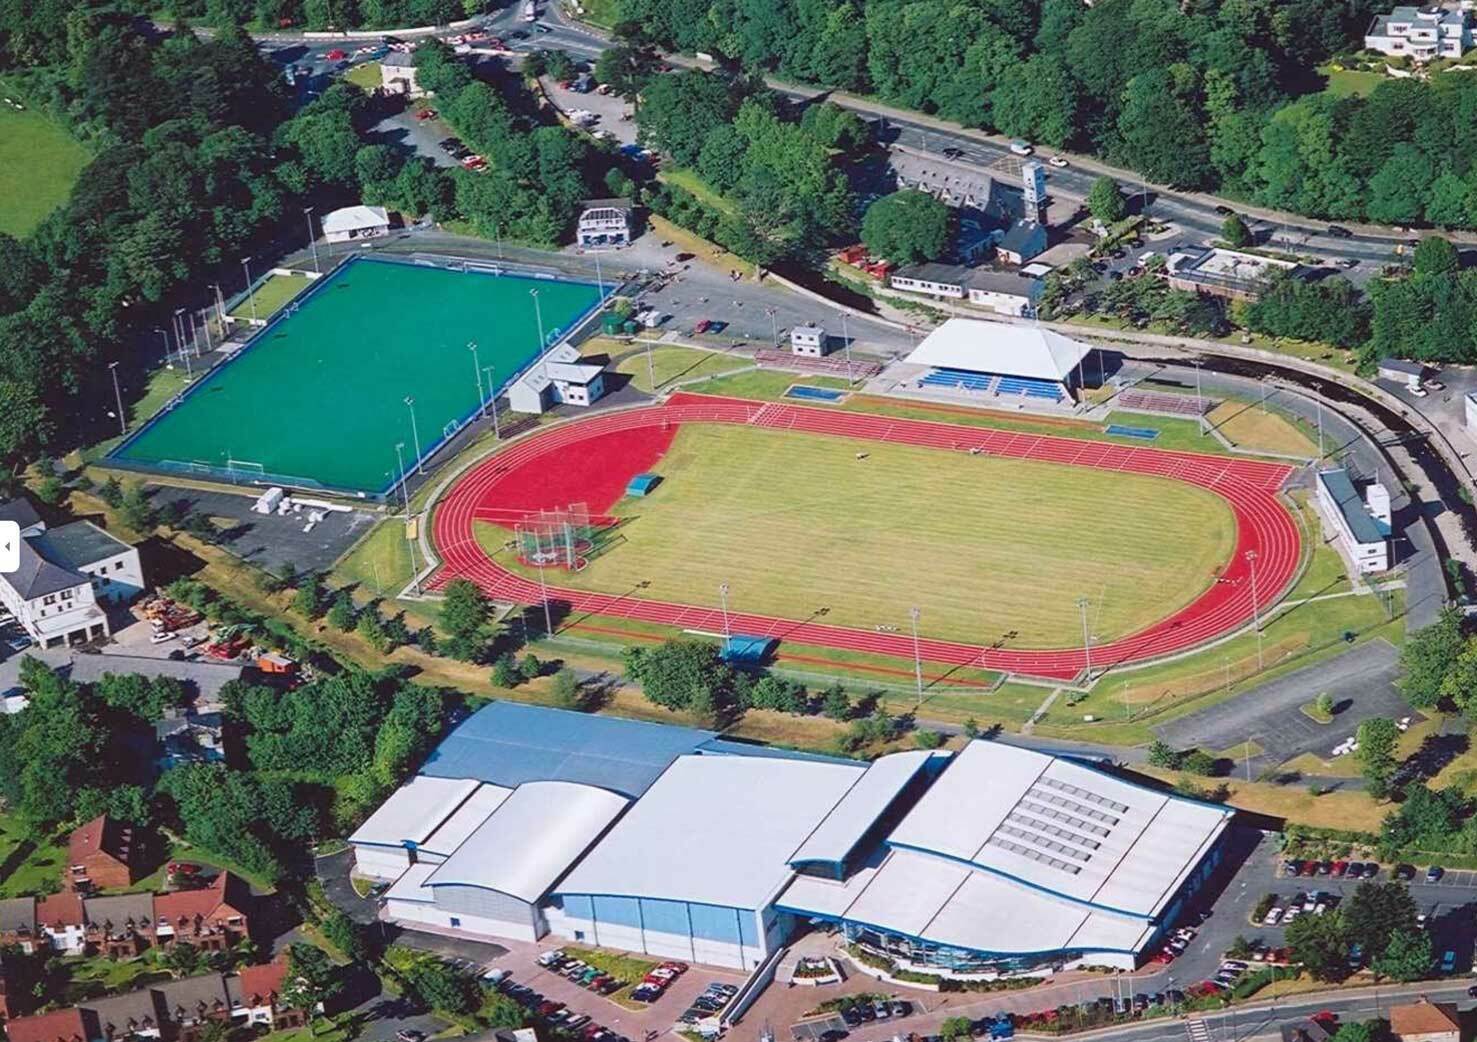 National Sports Centre